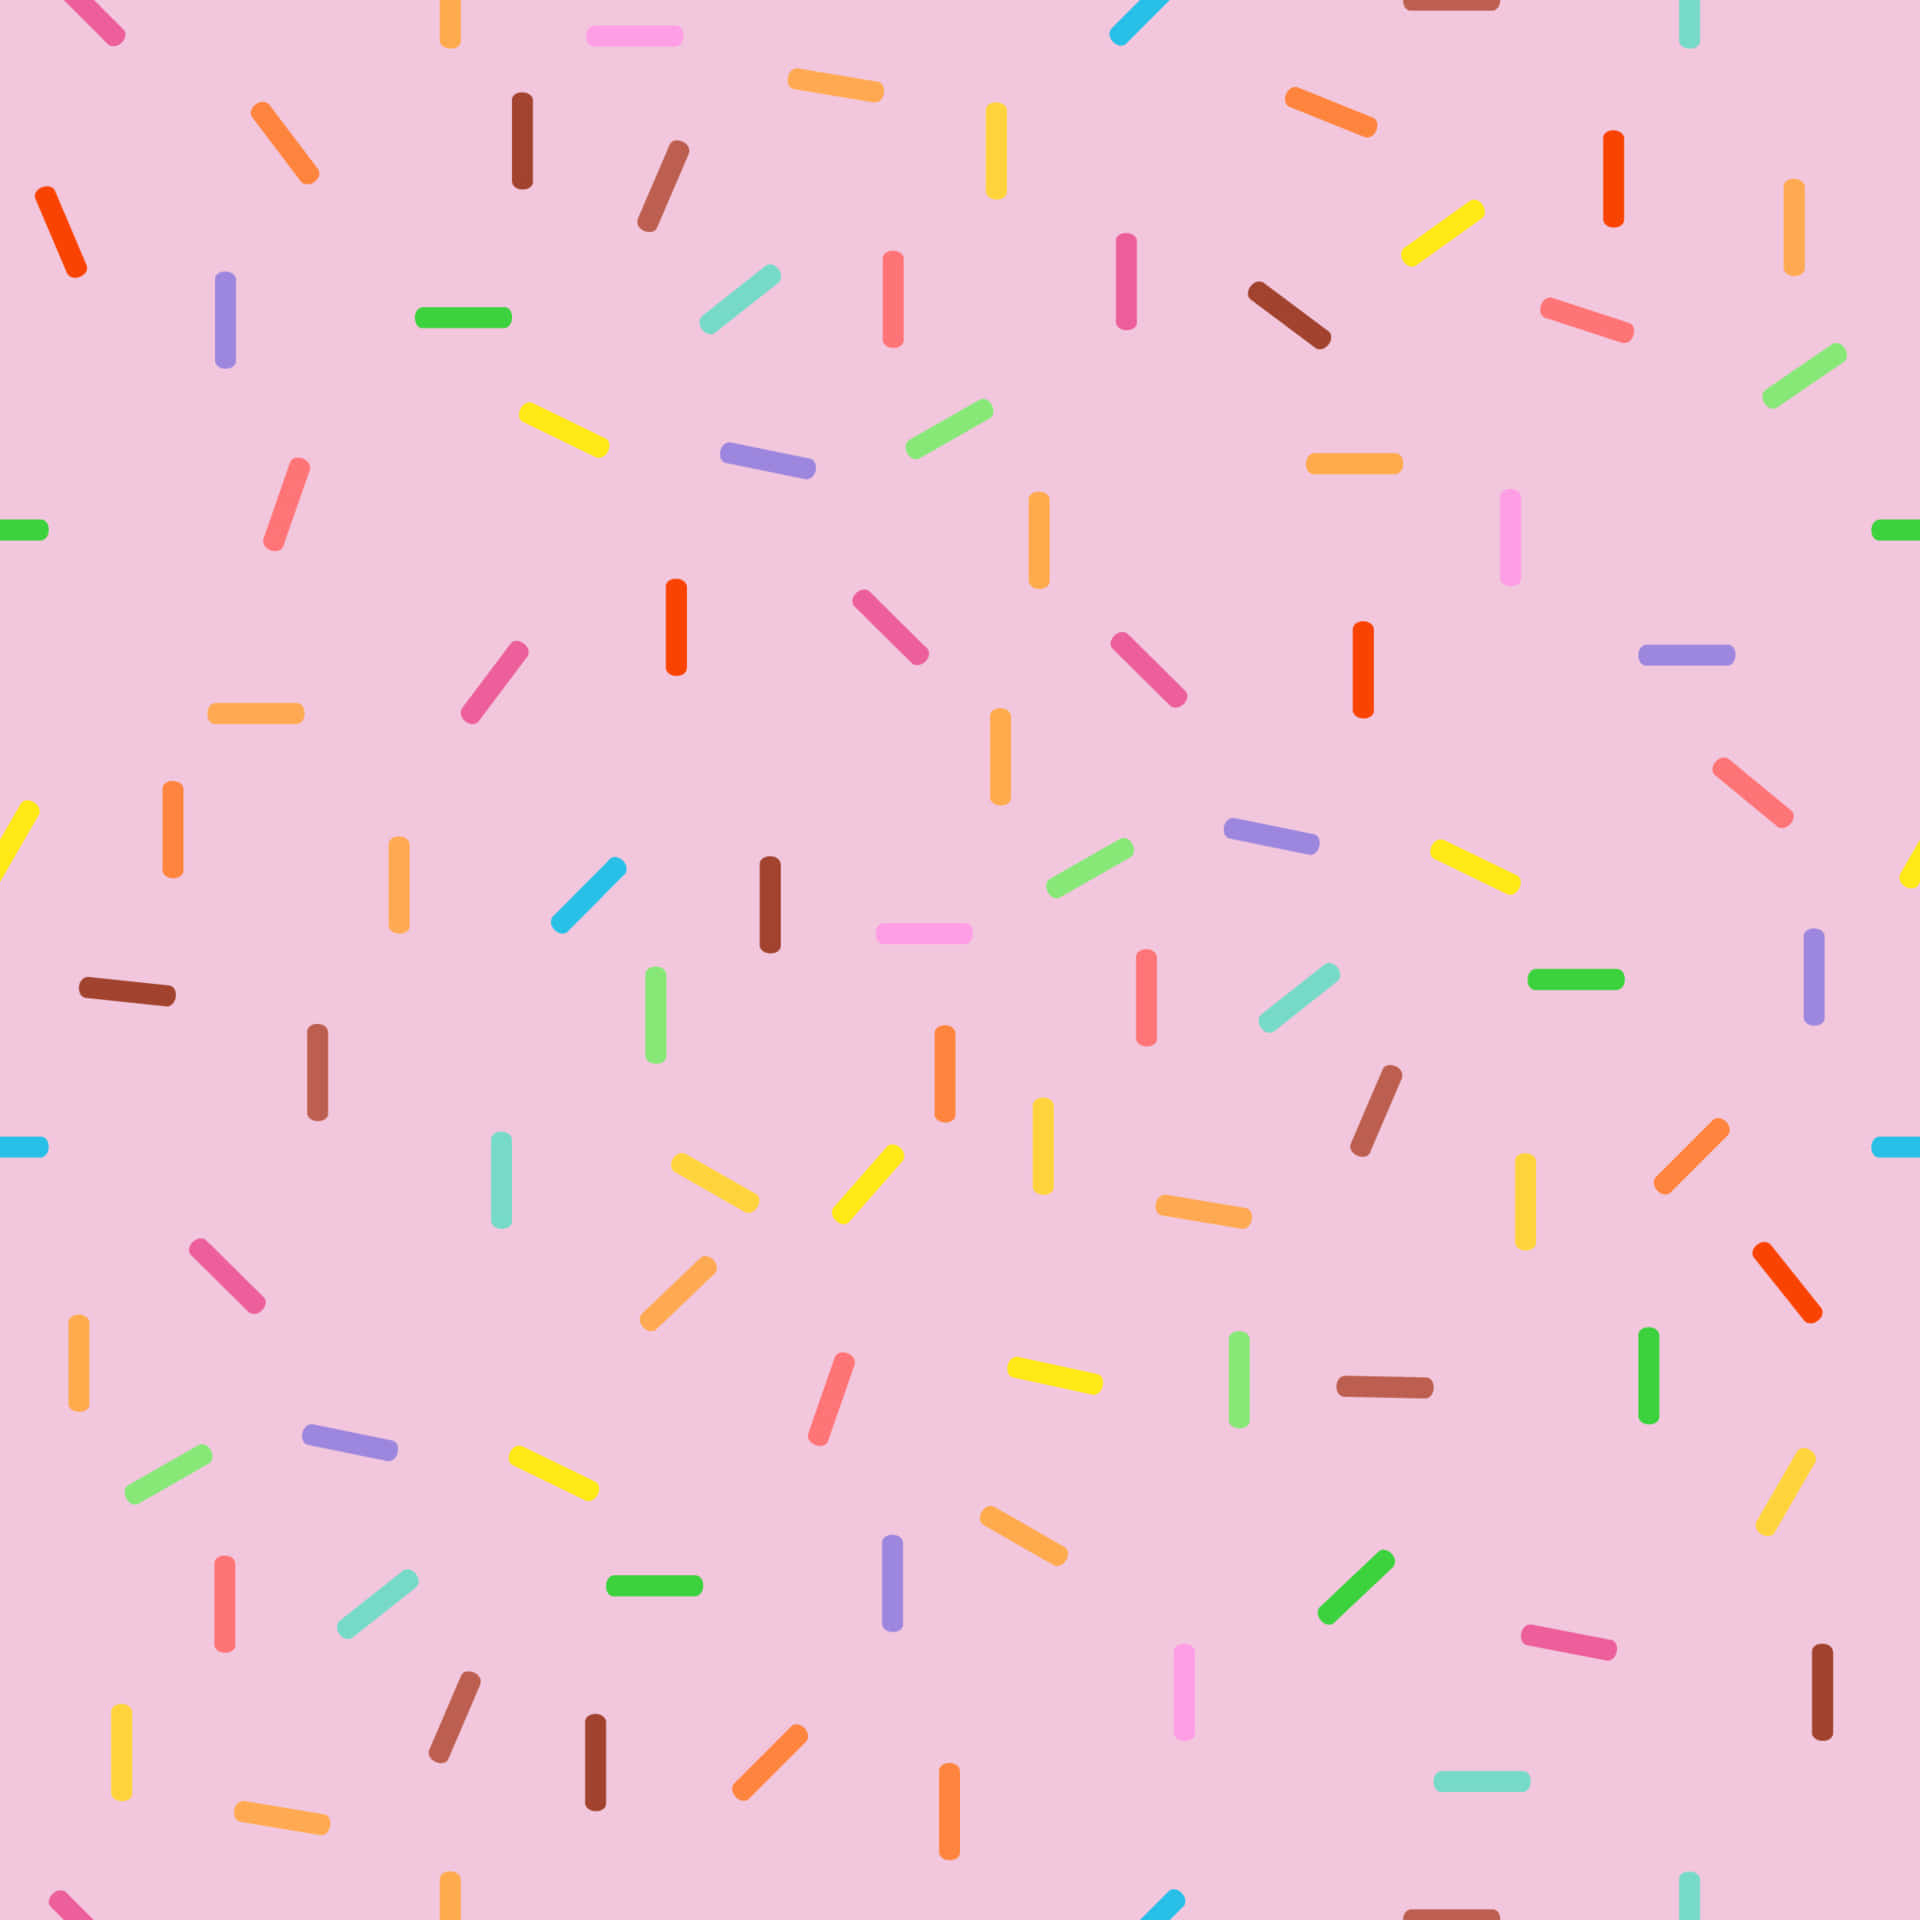 A fun and playful sprinkle background, perfect for a summer-themed event!